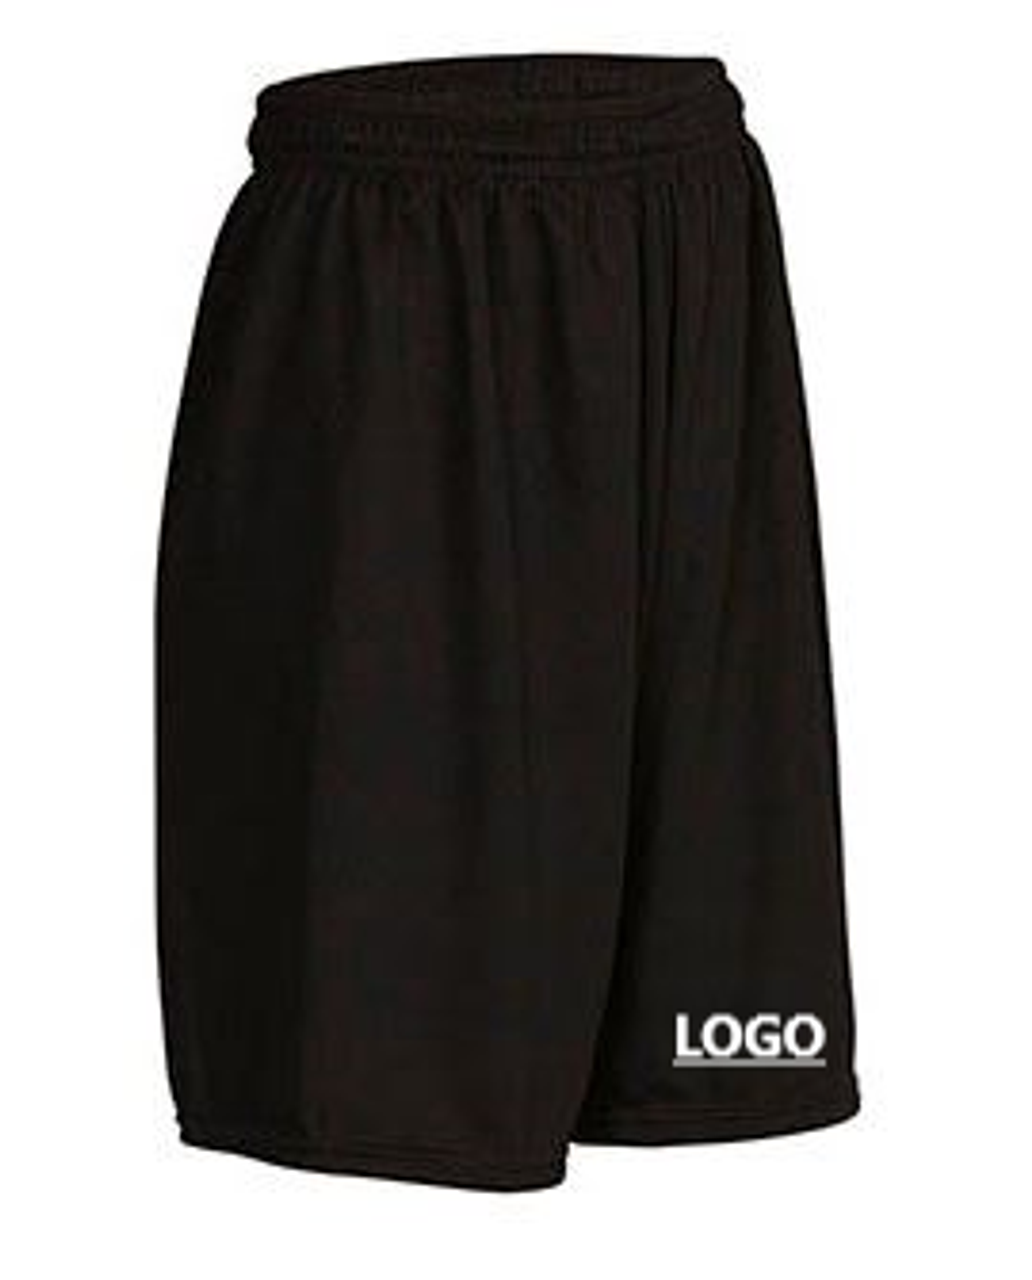 Greenleaf A+ Mesh Short Black with Logo - Educational Outfitters - Boise